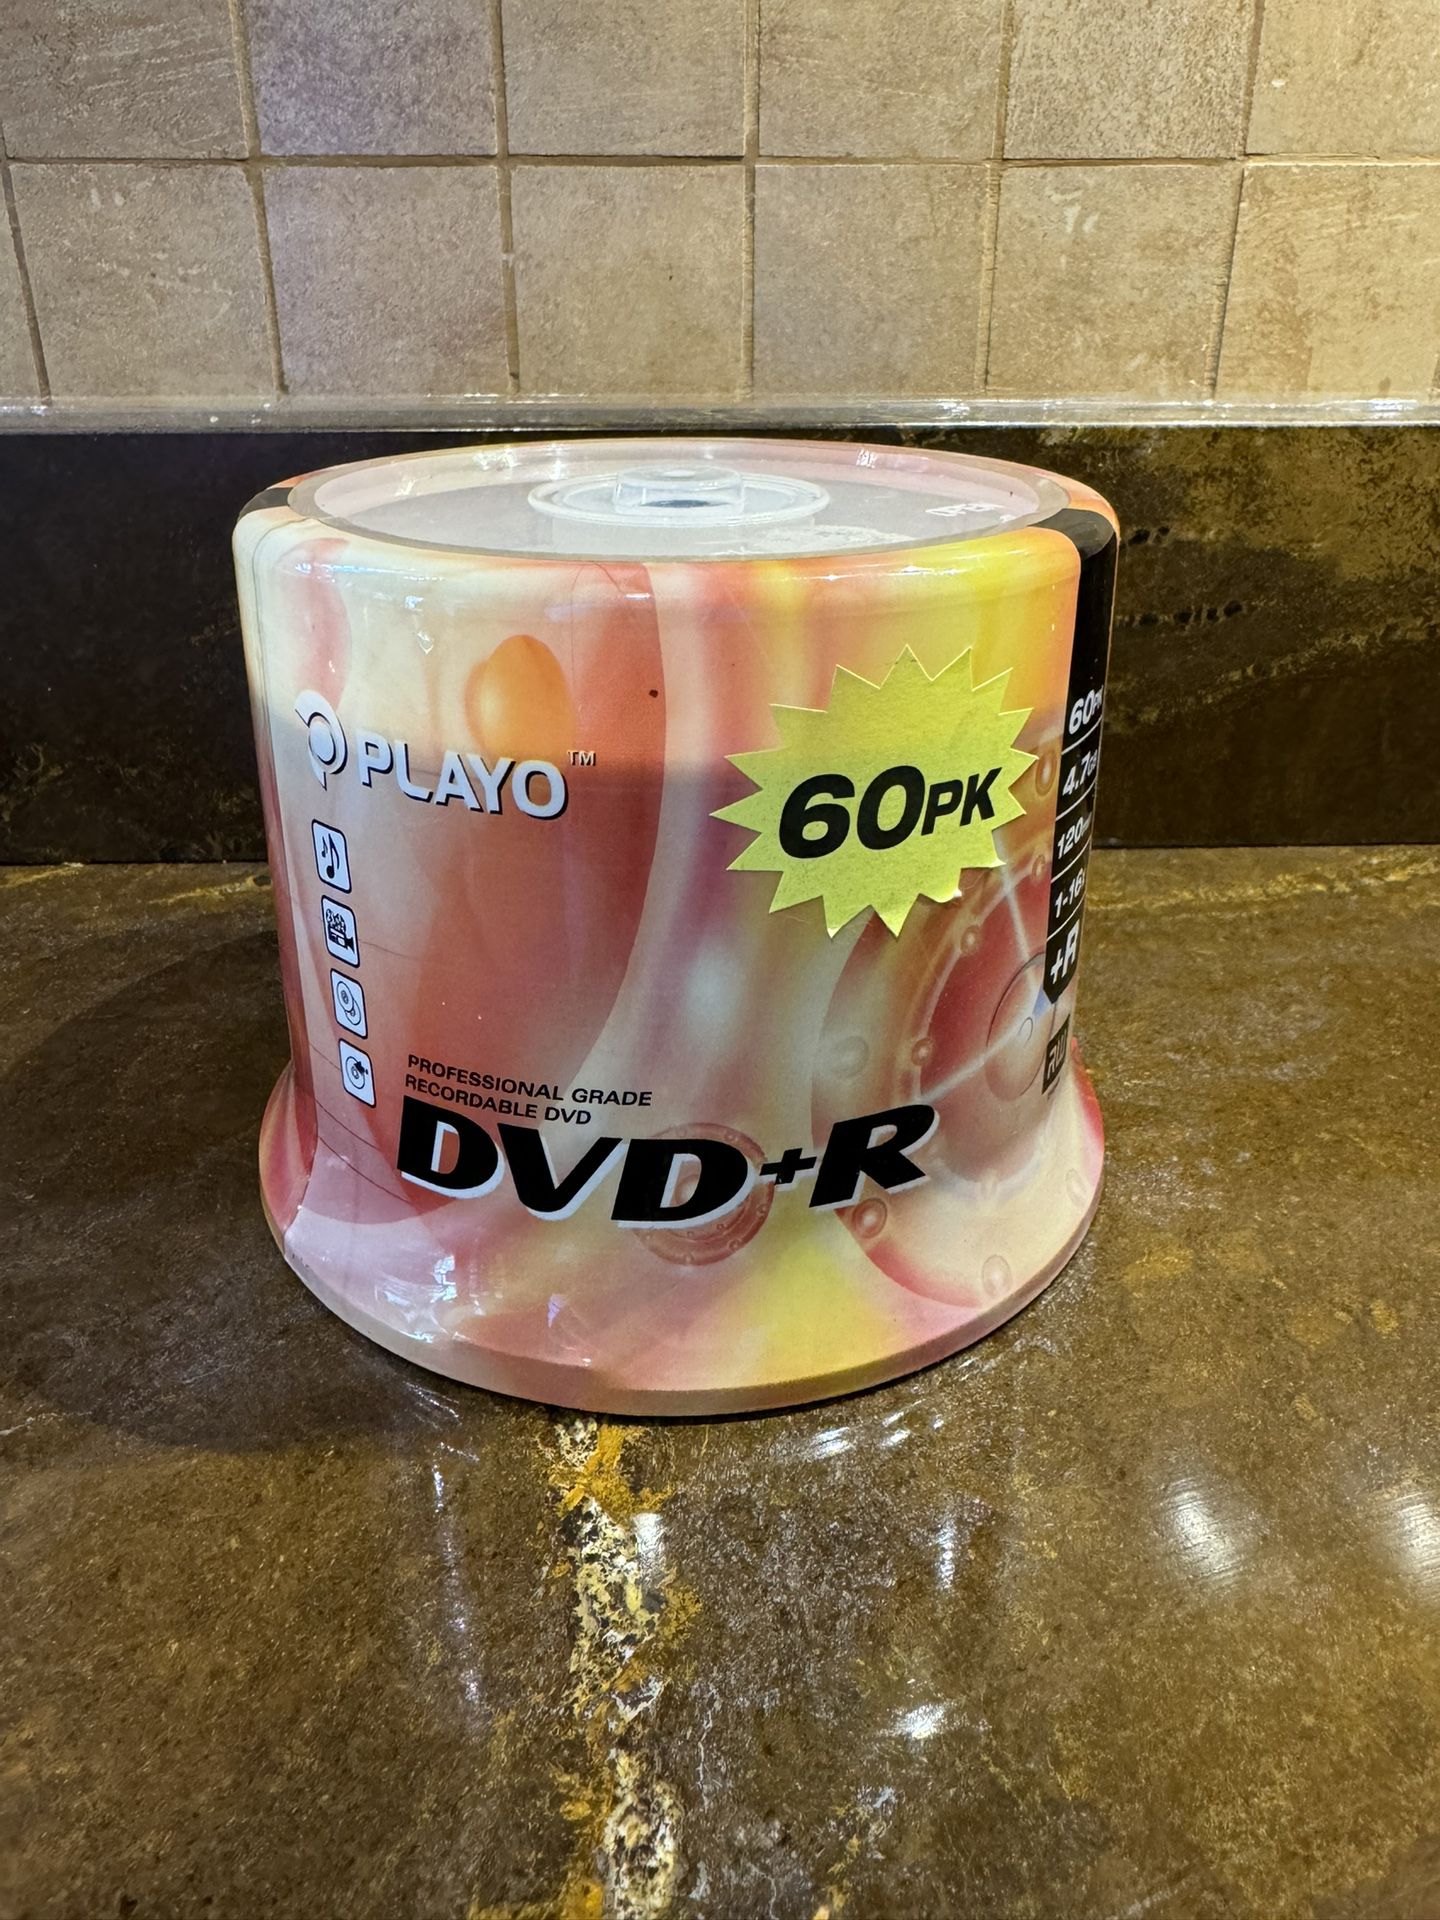 NEW Playo Blank DVD+R 4.7GB 120min 60 Pack Spindle DVD Recordable Discs 1-16x +R